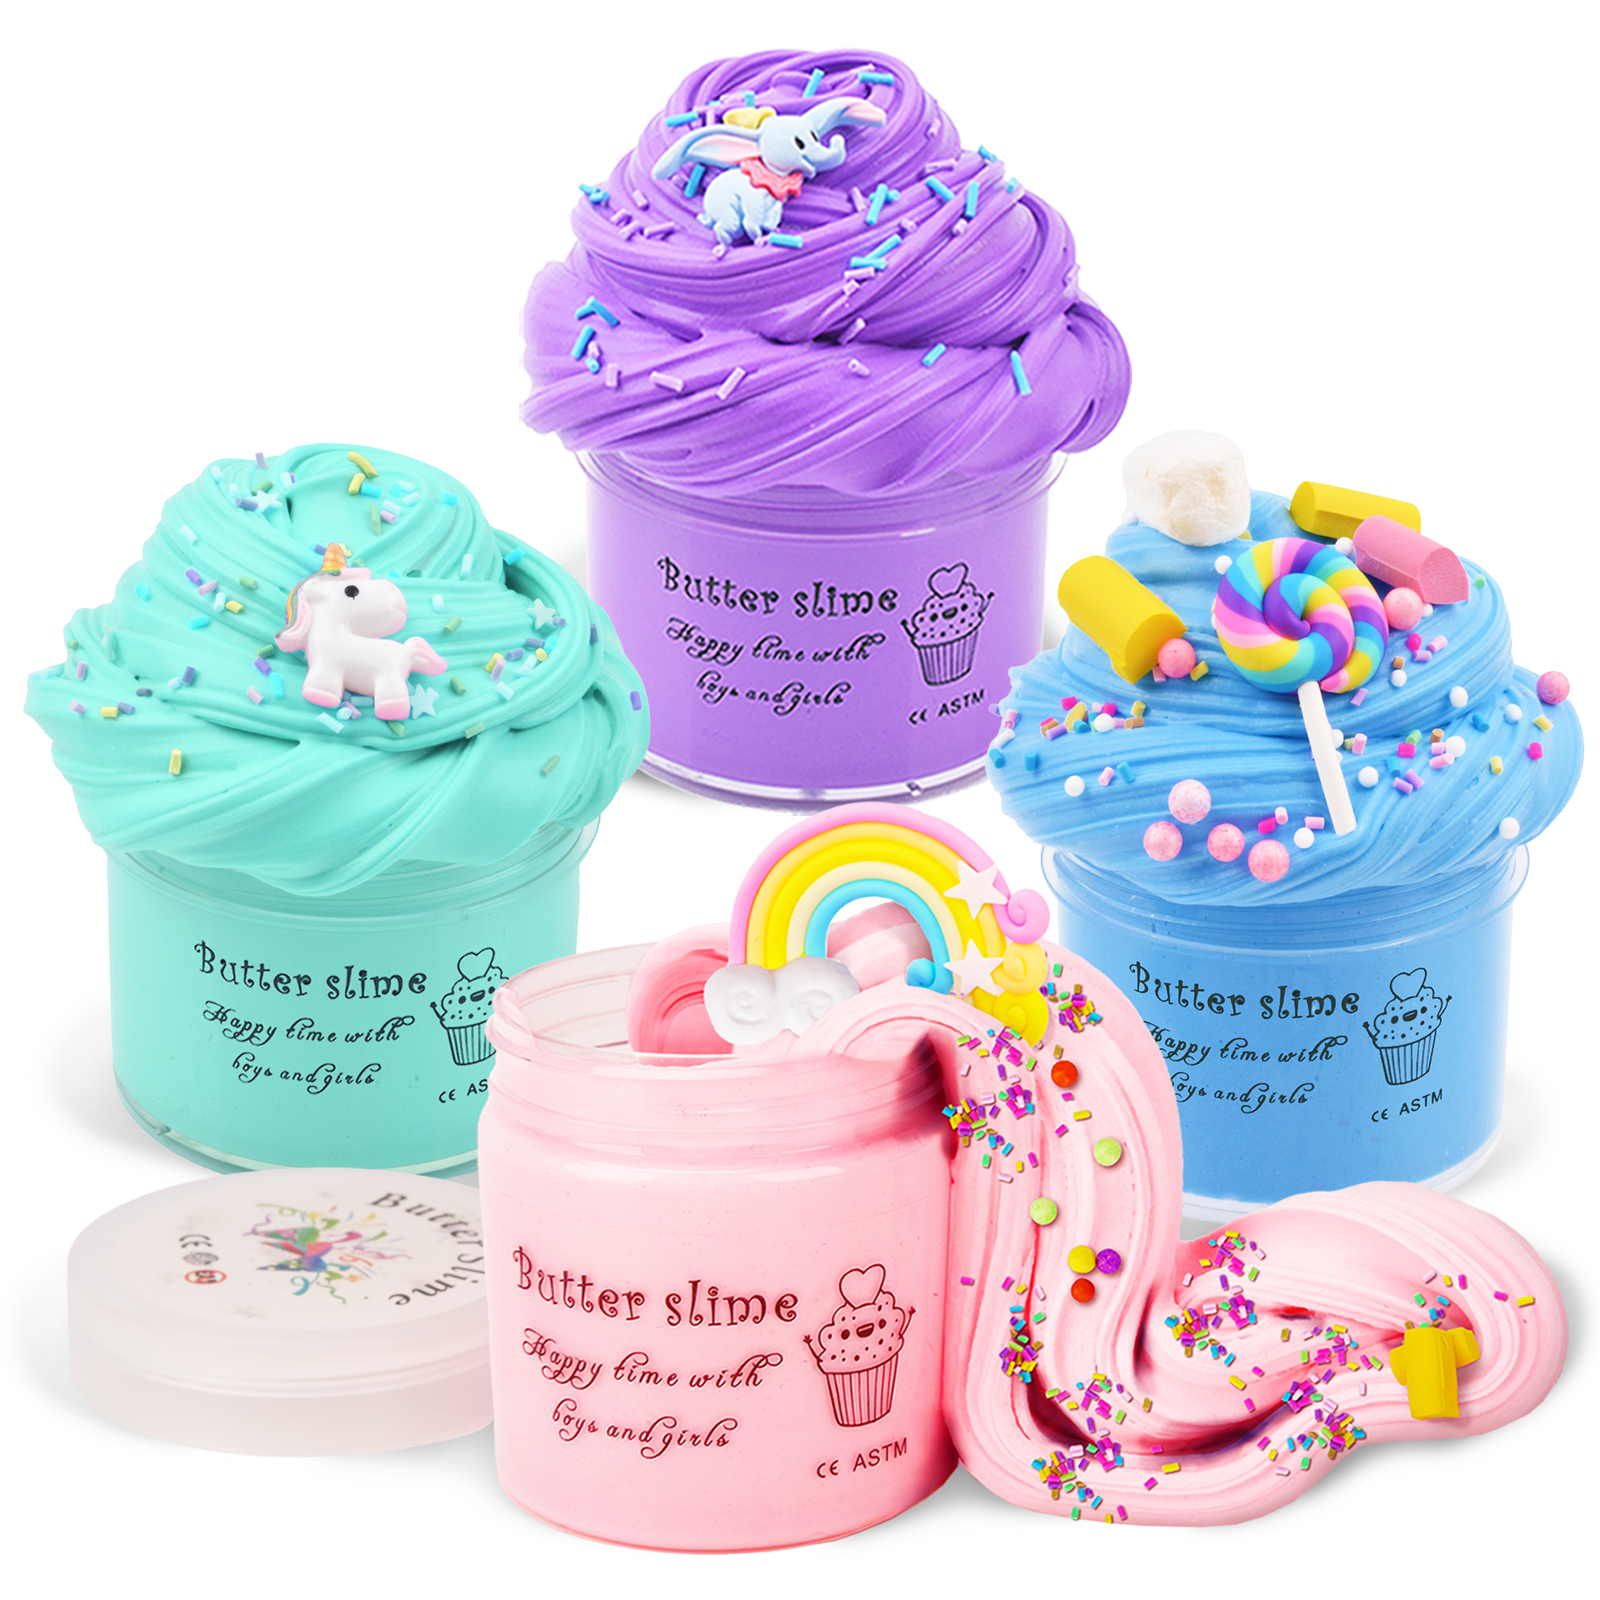 Dream Fun Toys Gifts for 6 7 8 9 10 Year Old Girls, 4 Pack Kids Fluffy  Slime Kits Toy Putty Slimes Set Gift for 5 6 7 8 9 11 Years